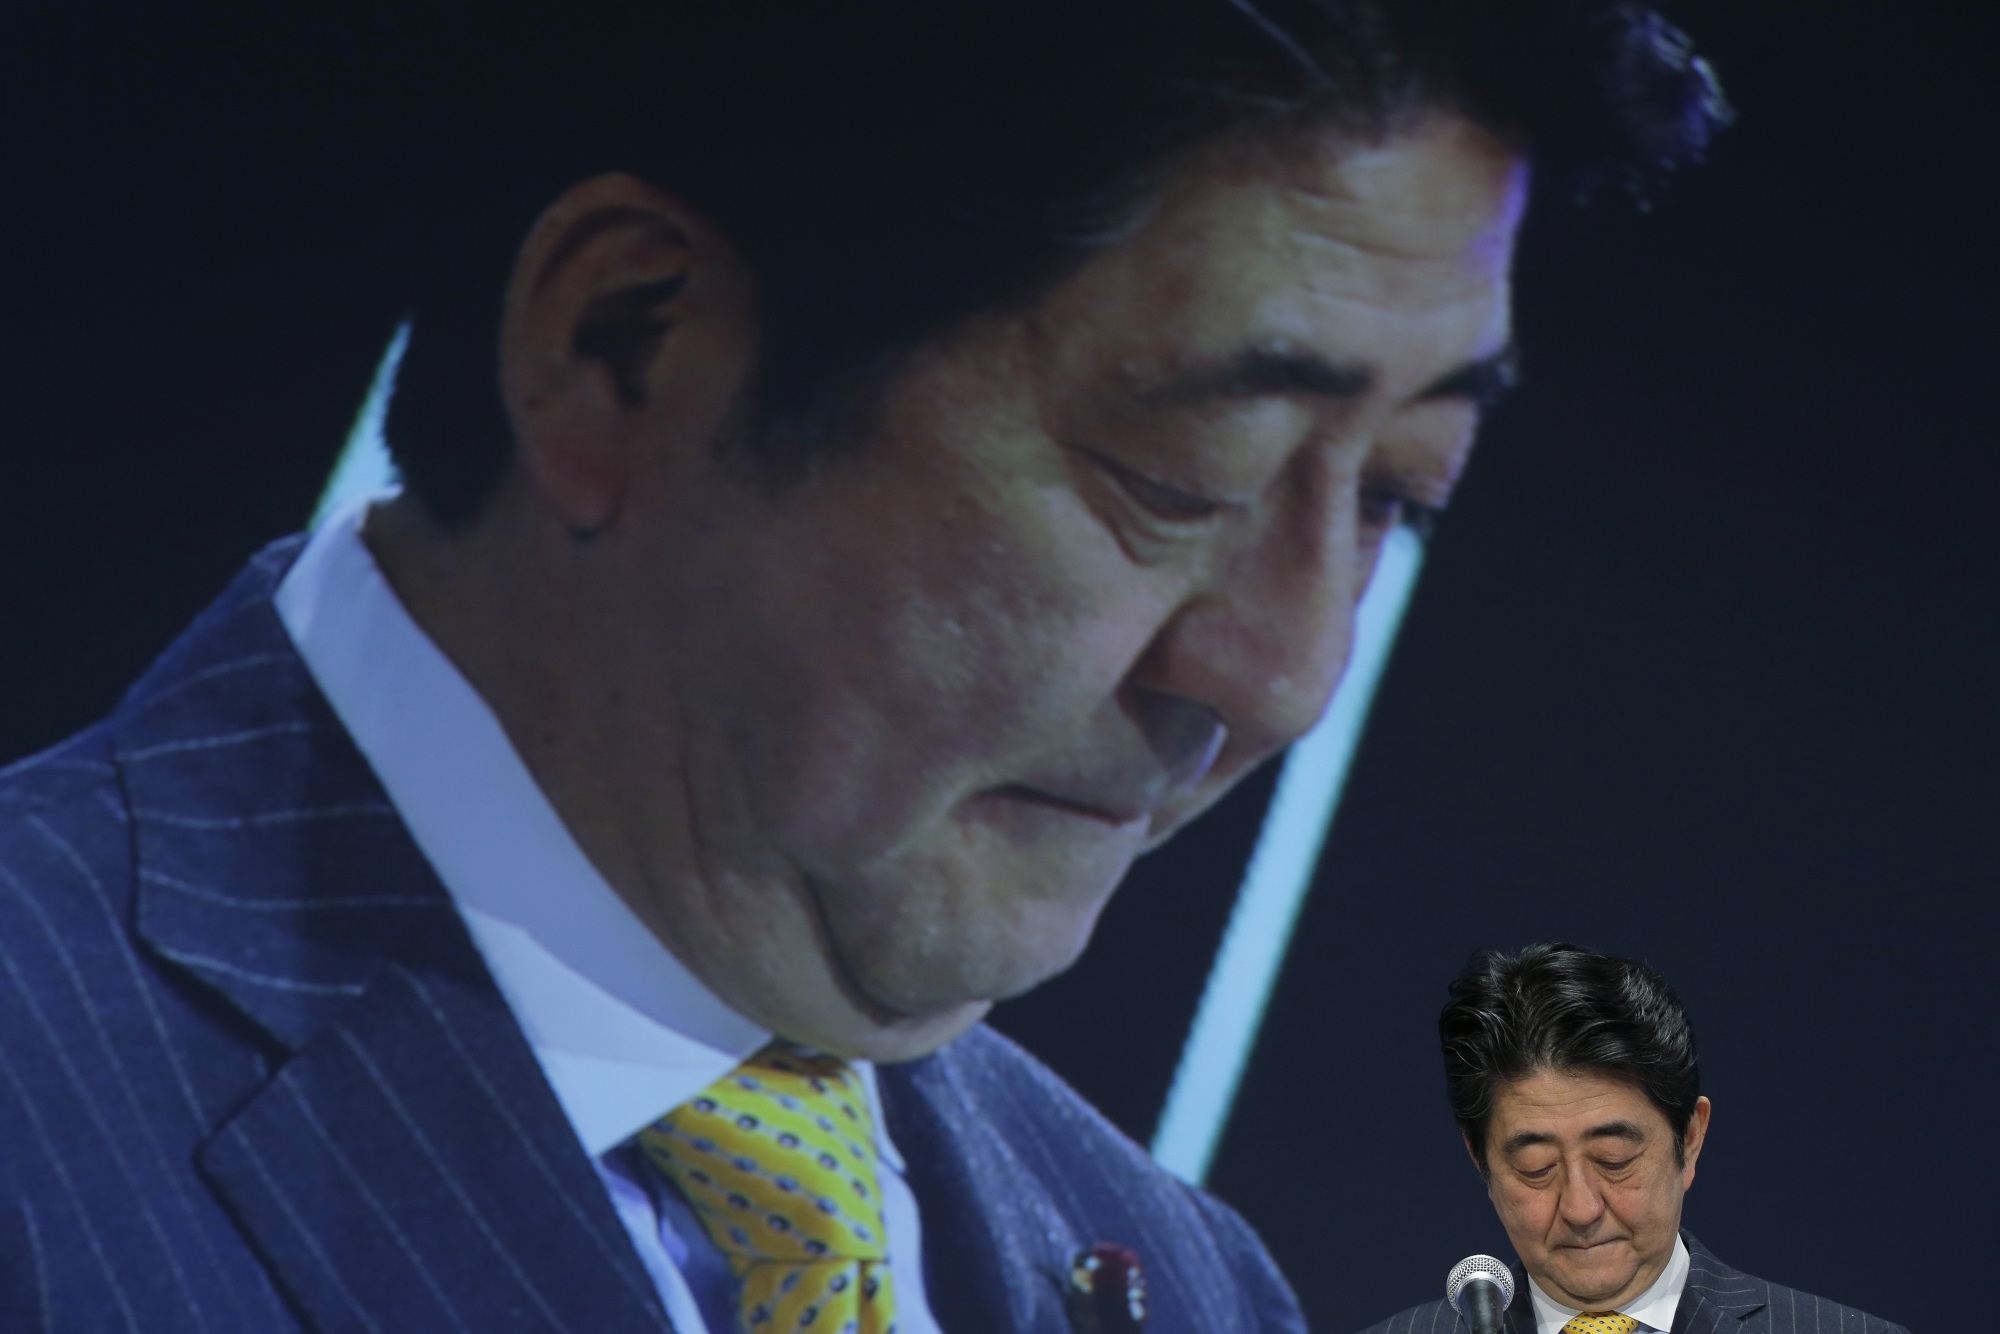 Sad: Could the policies of Prime Minister Shinzo Abe have something to do with why so many Japanese report feeling so unhappy? | KIYOSHI OTA / BLOOMBERG